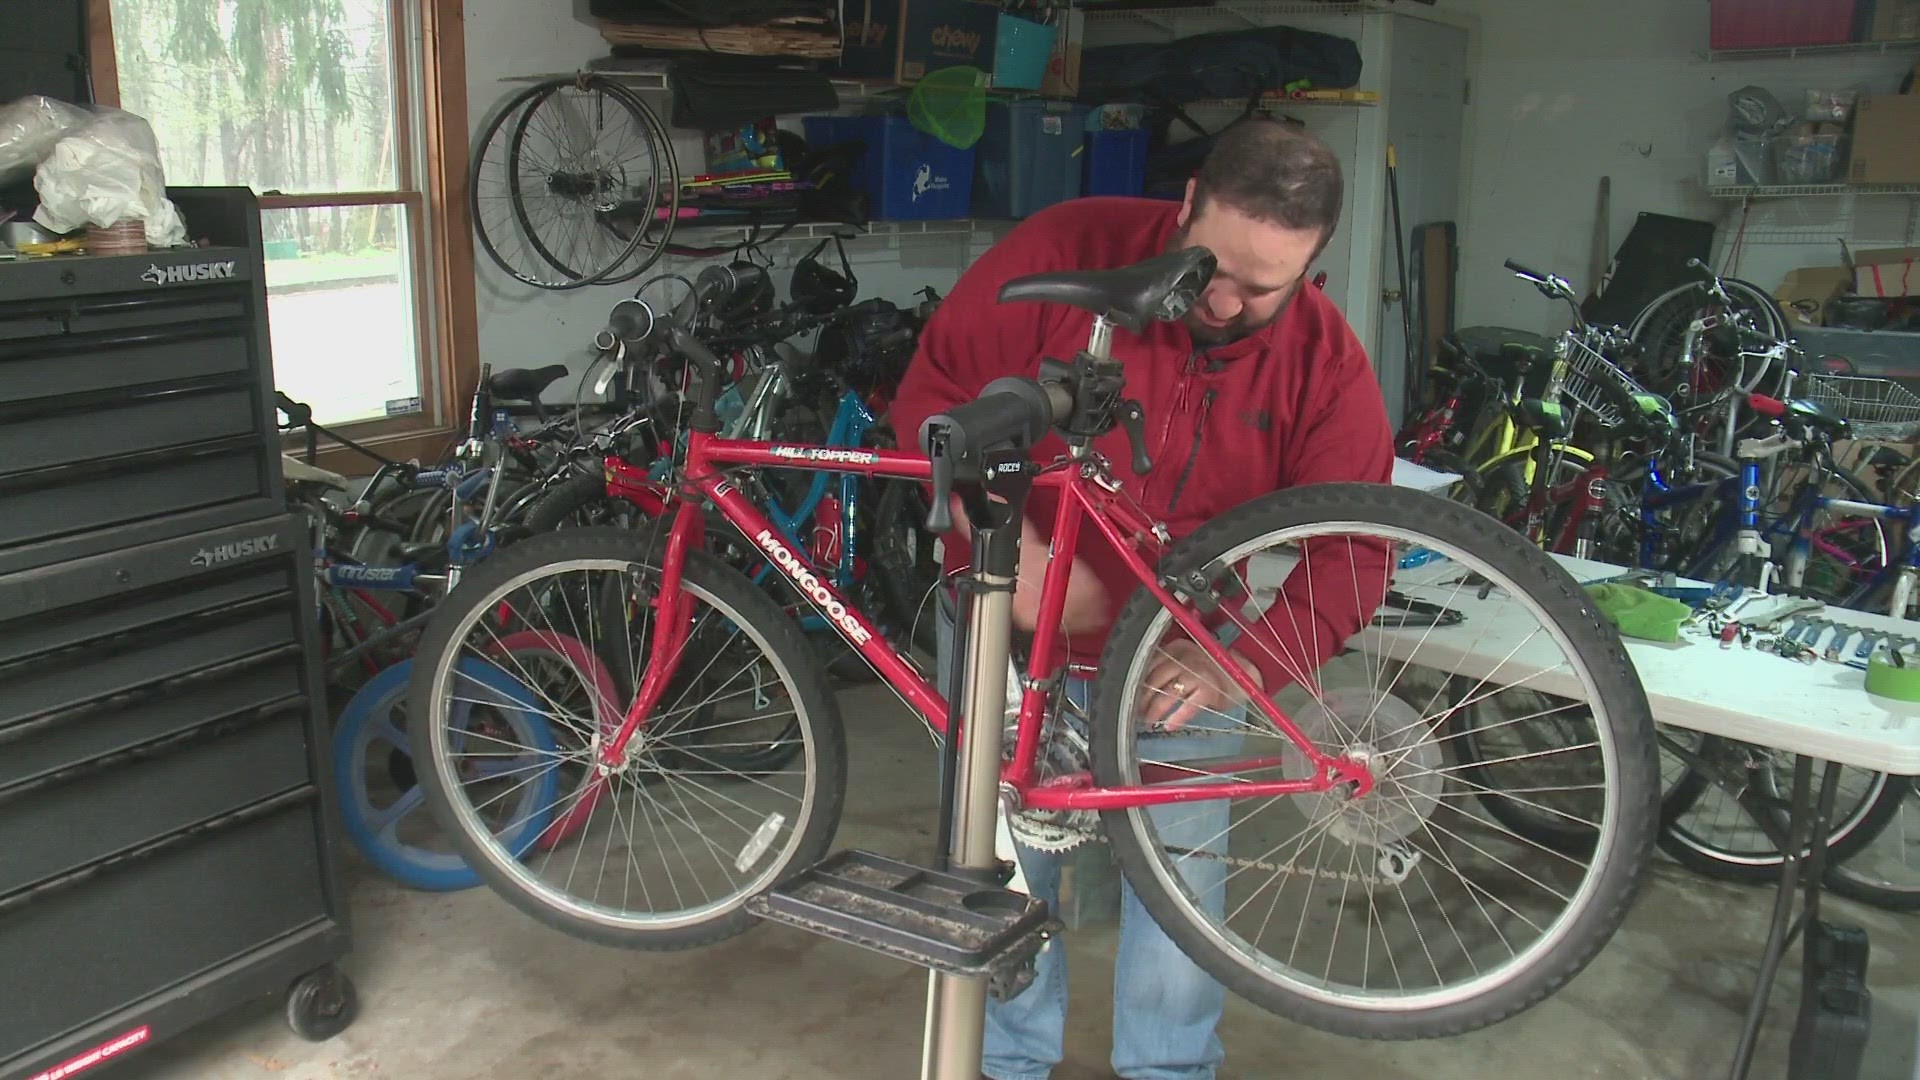 Three years and 400 bikes later, Brian Diamond-Falk continues to help those in need.